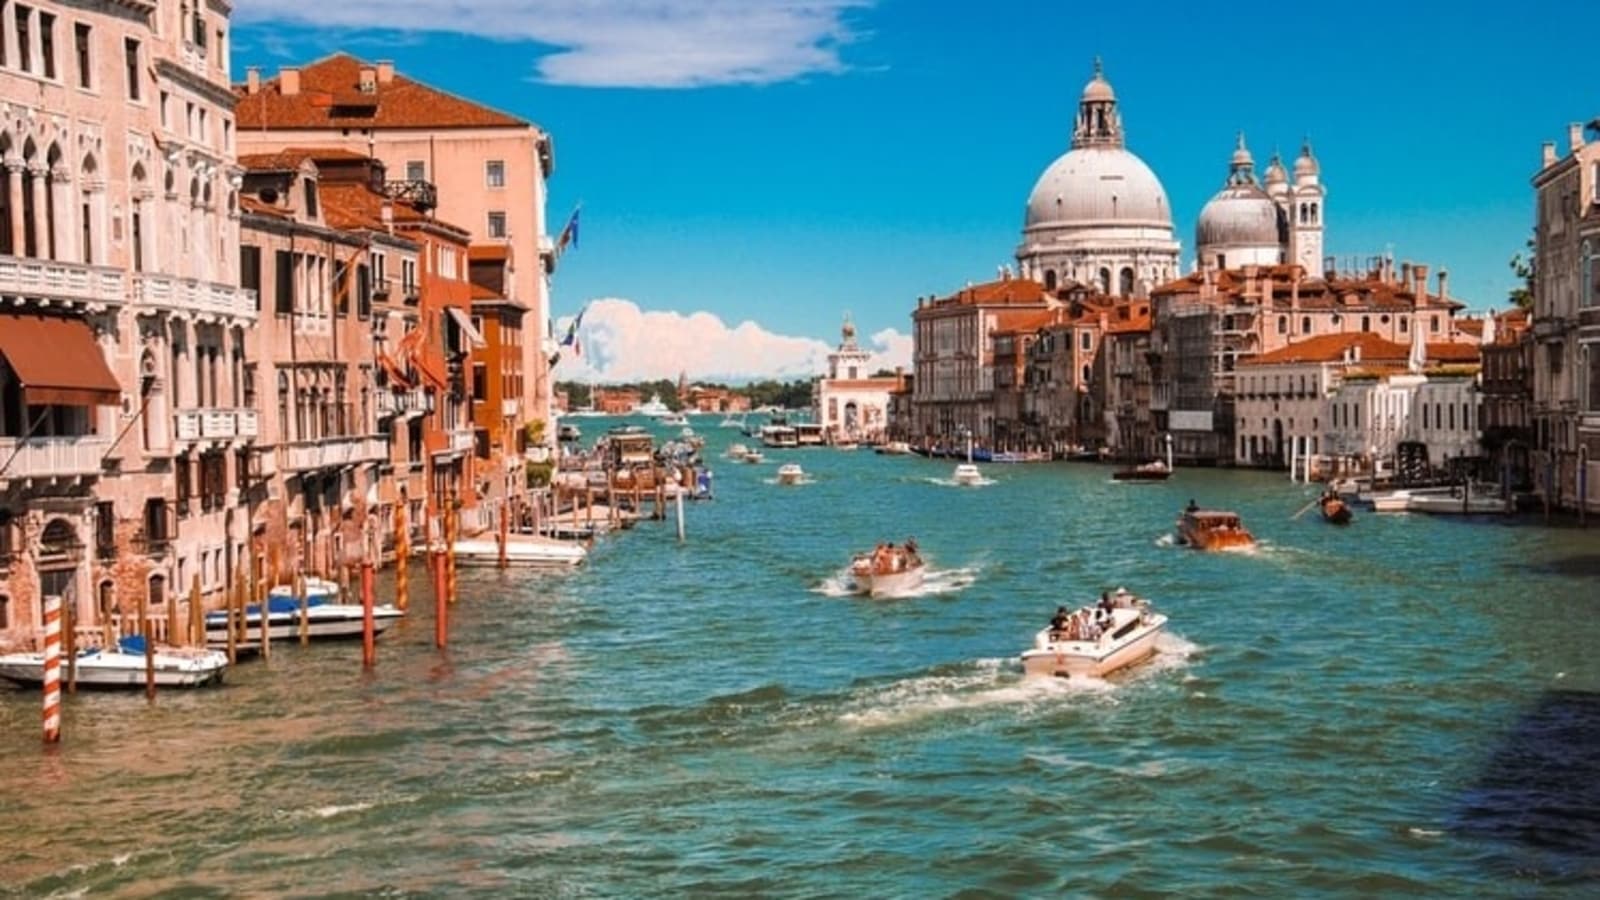 Italy's Venice becomes world's 1st city to announce entry fee for tourists